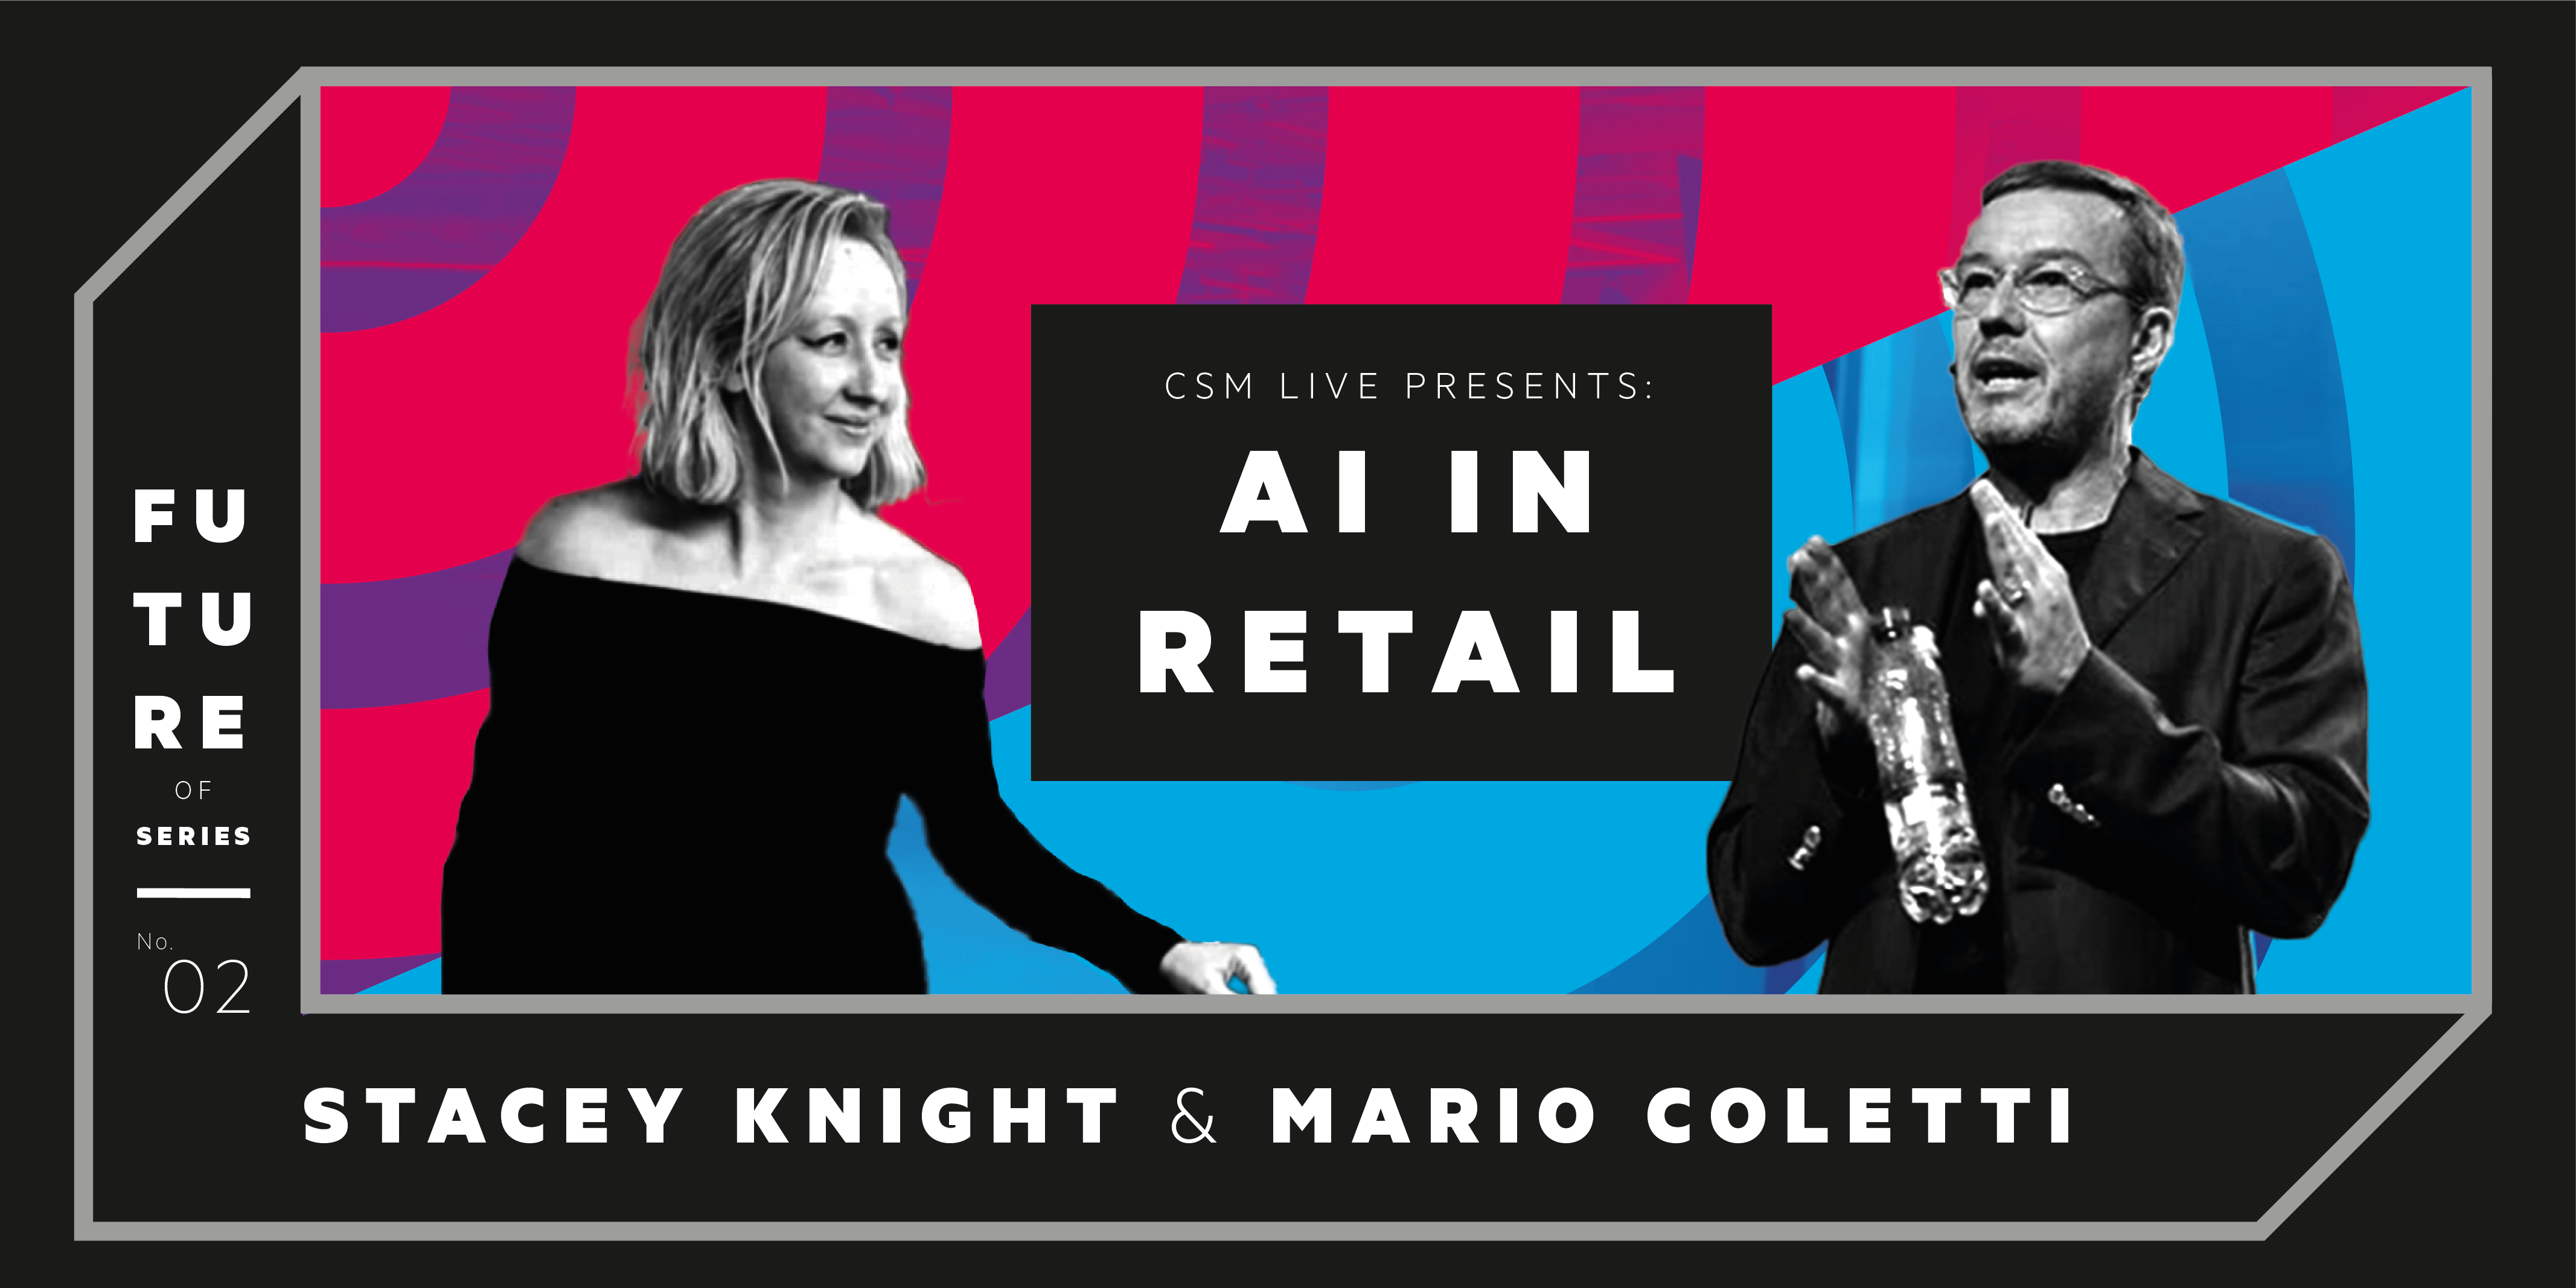 CSM Live presents AI in retail, Stacey Knight and Mario Coletti